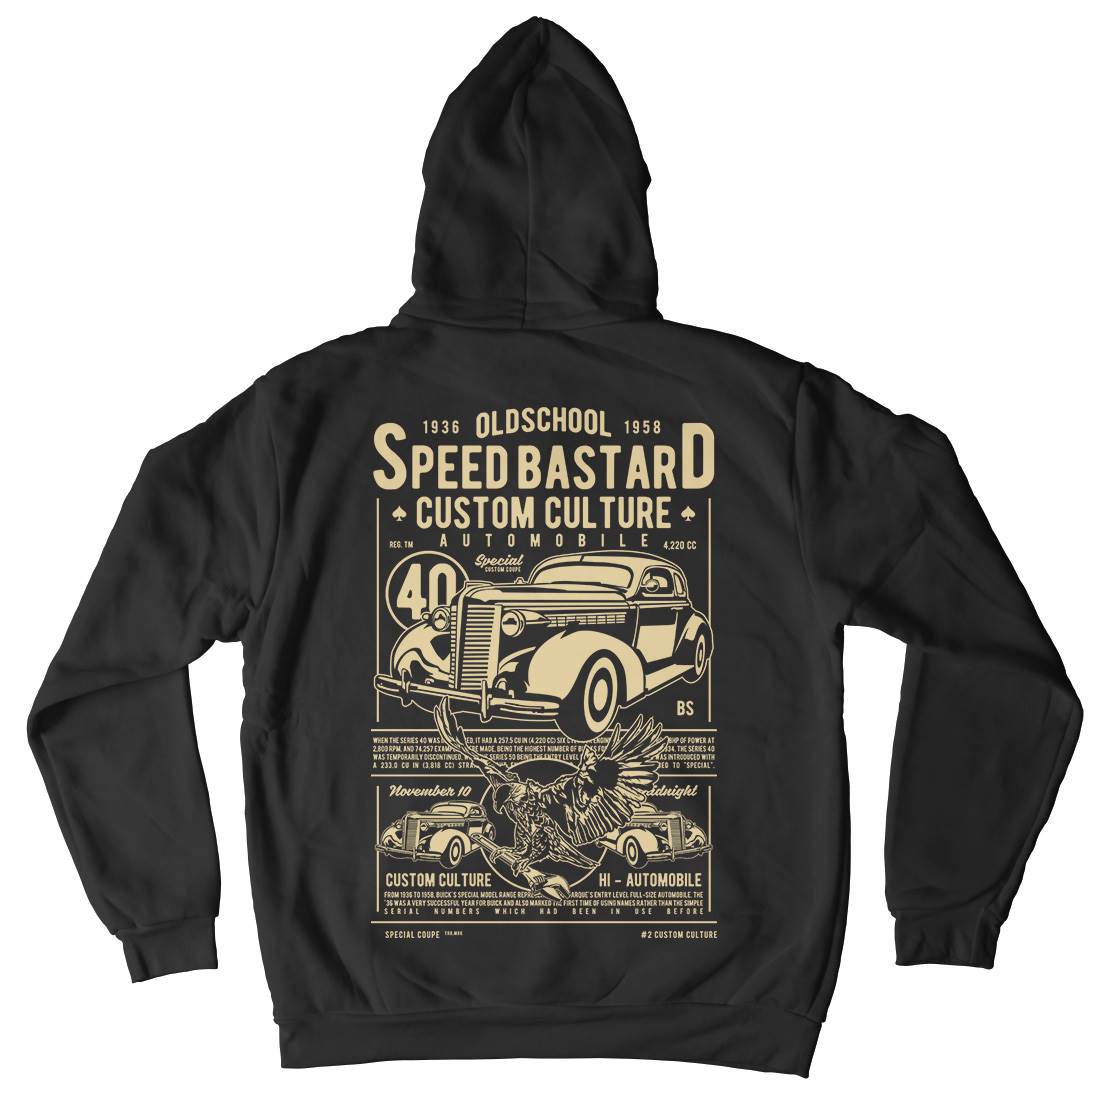 Speed Bastard Mens Hoodie With Pocket Motorcycles A761